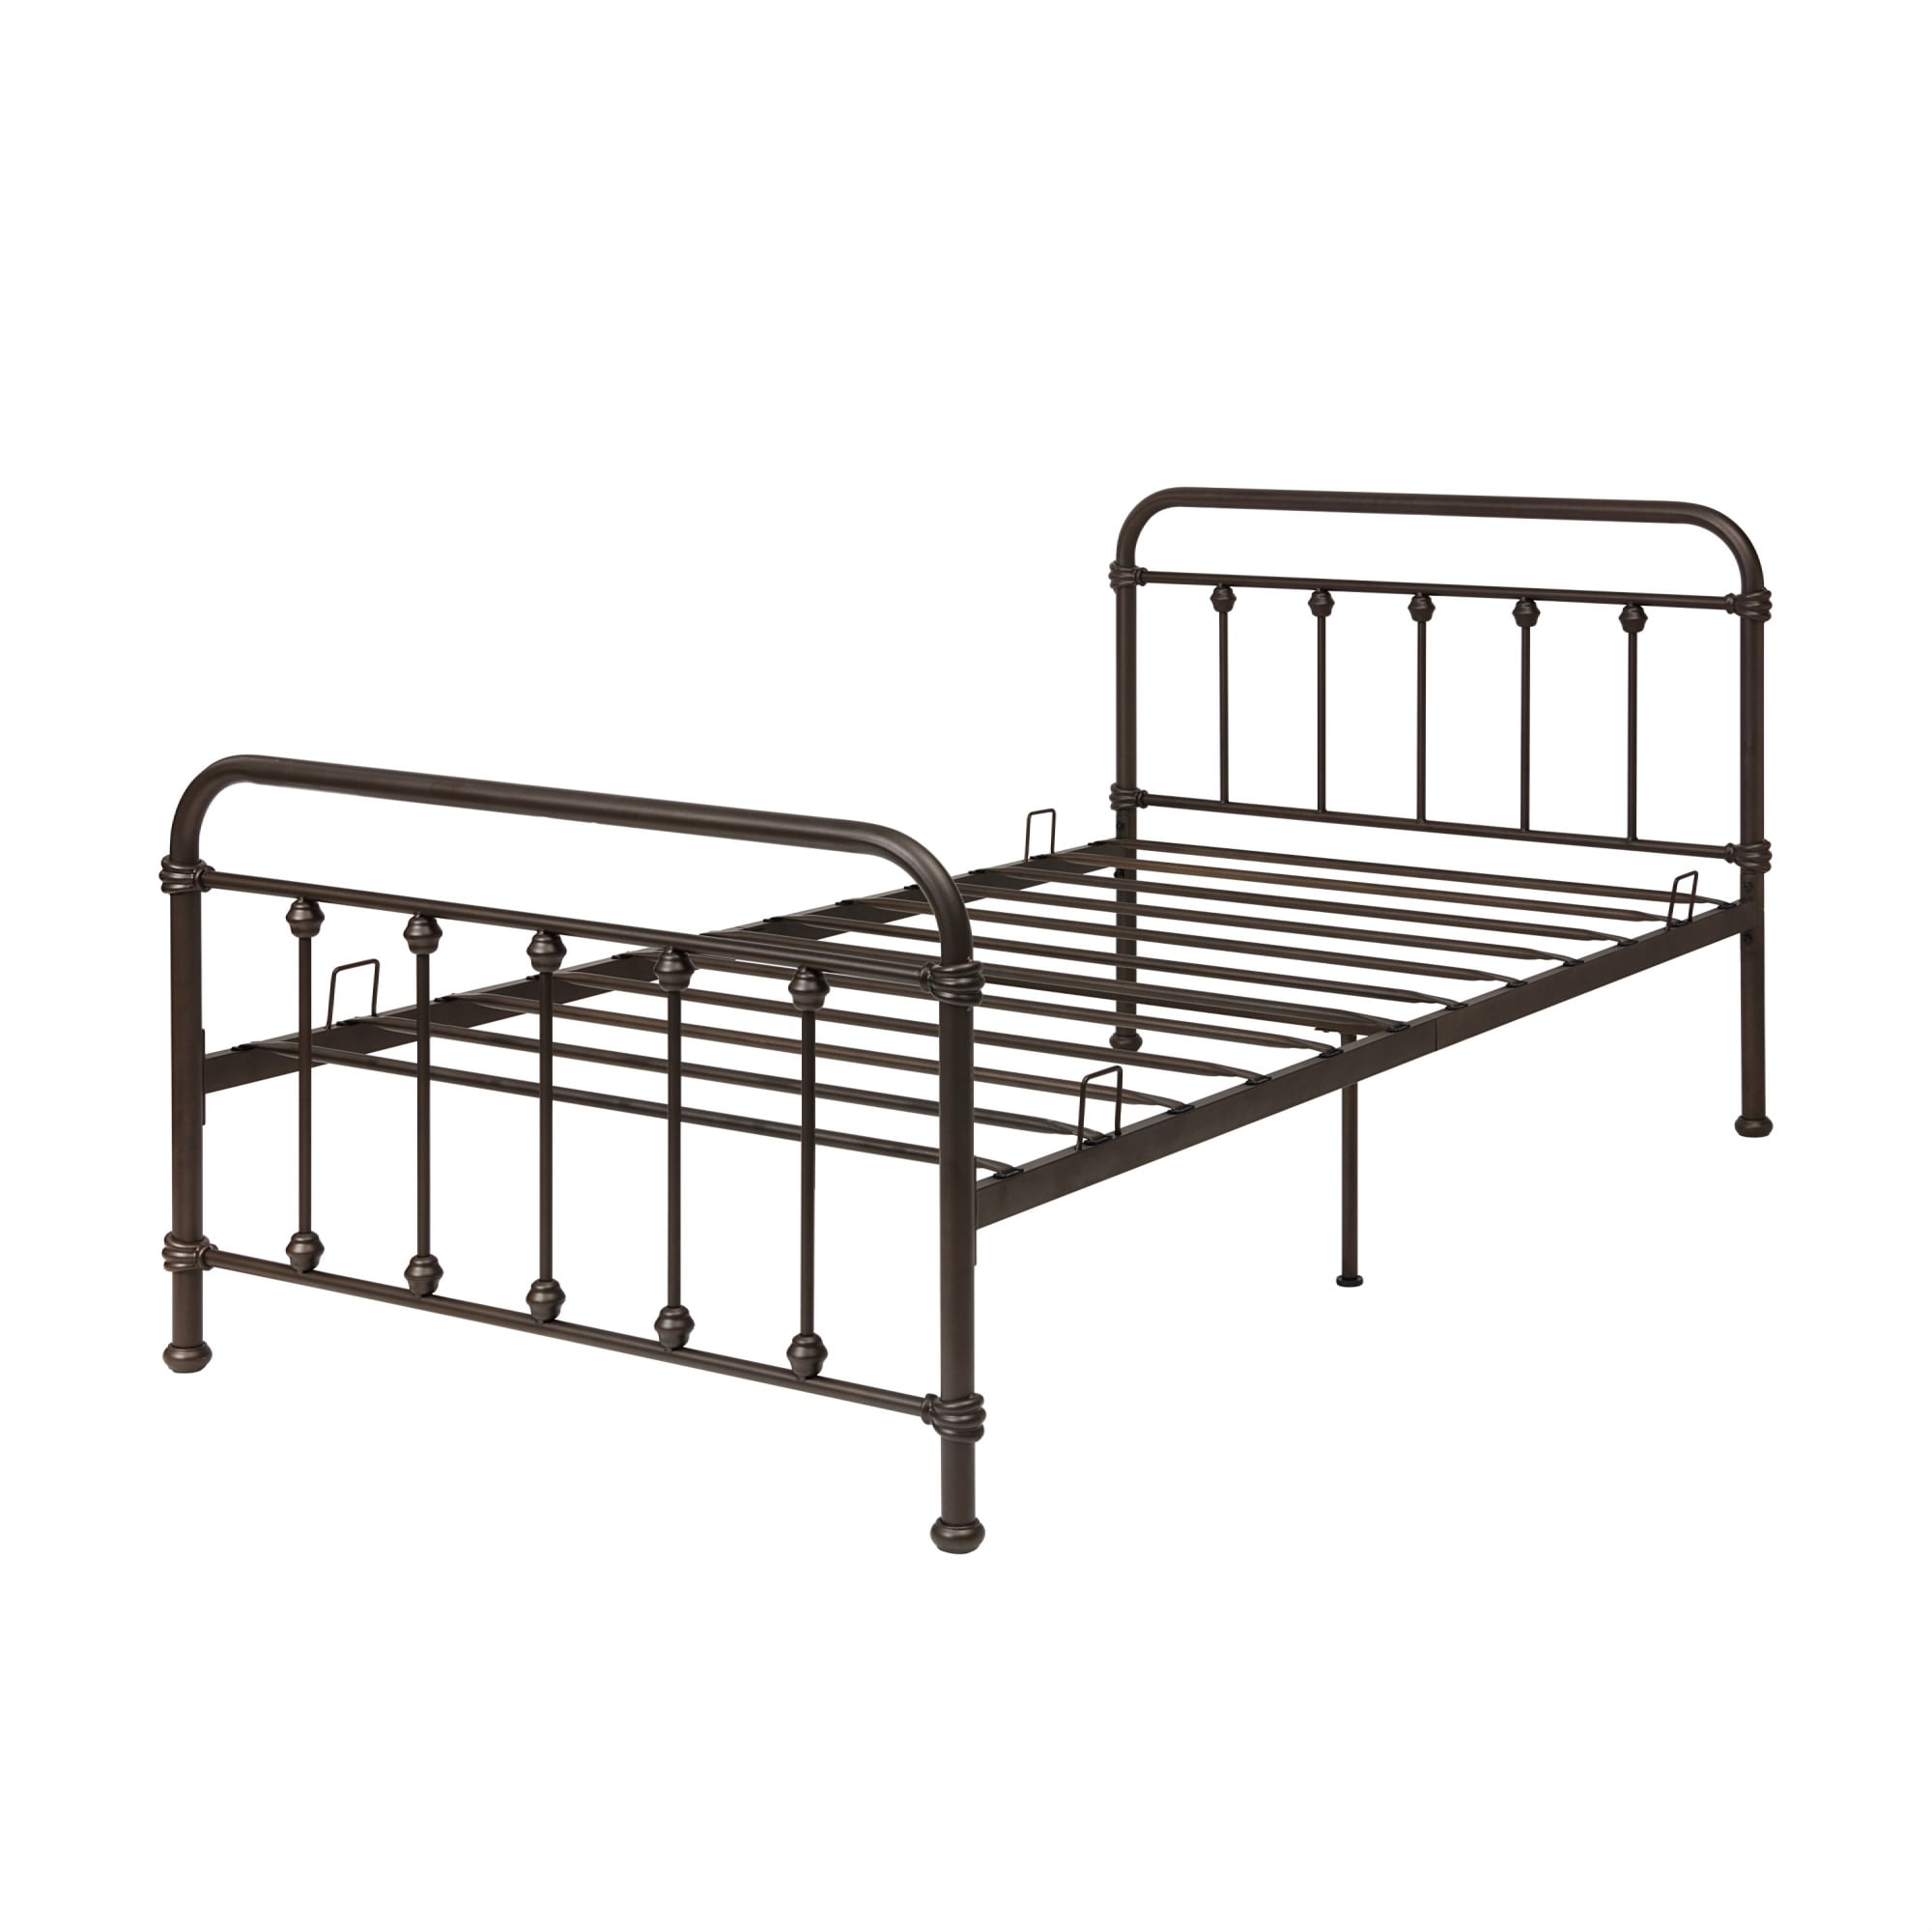 Picture of 4D Concepts 143443 Amelia Twin Bed, Textured Bronze